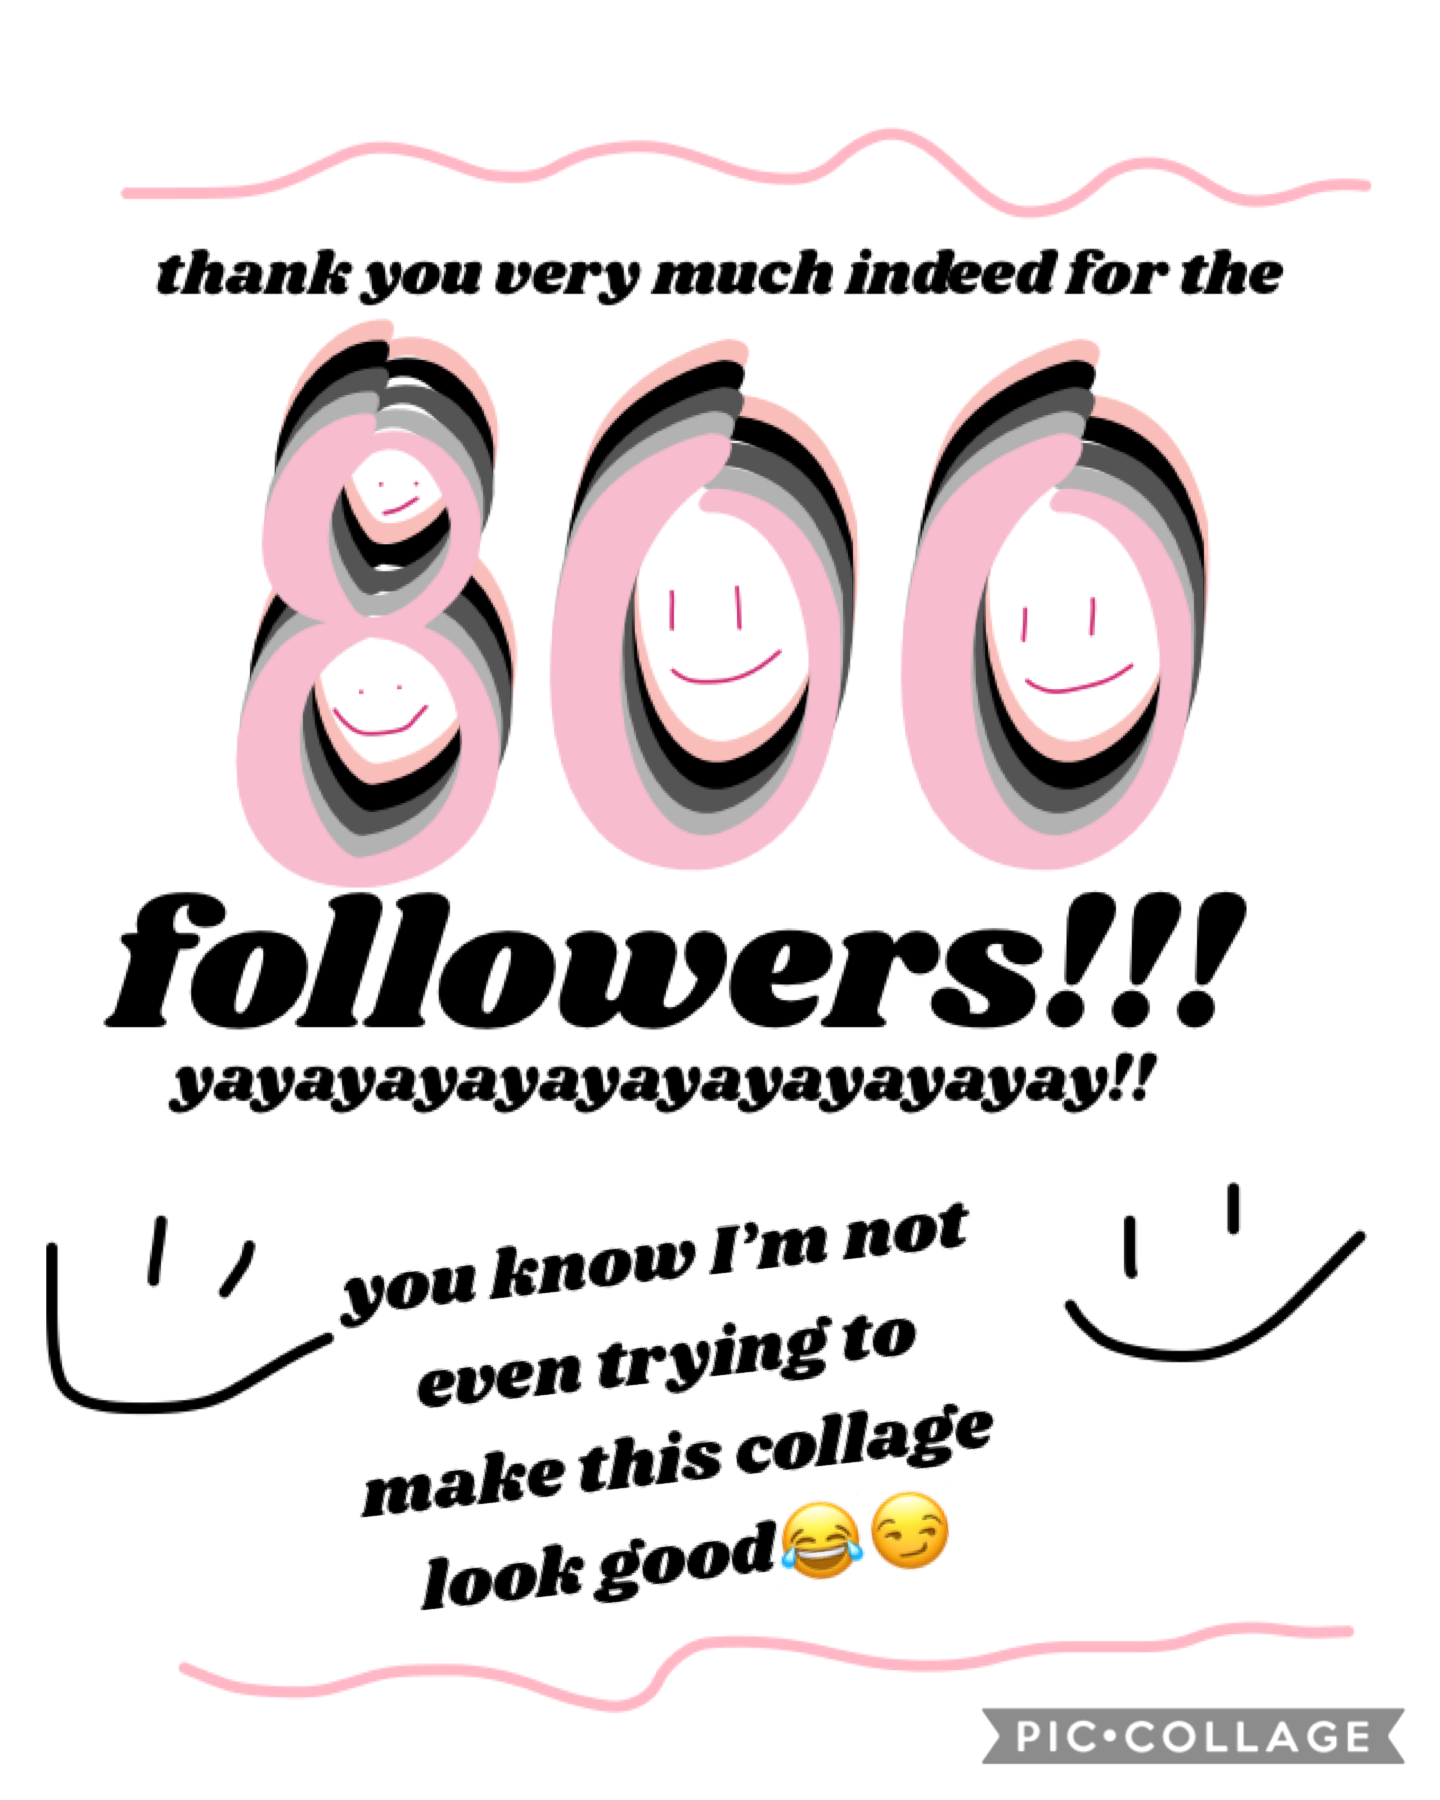 💖Tap💖
Thanks everyone!
I don’t know how long I’ve been on PicCollage but it’s been really great :)
Ginormous shoutout to -SUN_L1GHT-
My irl BFF!! She got me onto PC in the first place and her collages are stunning :D
Go follow her if you haven’t already